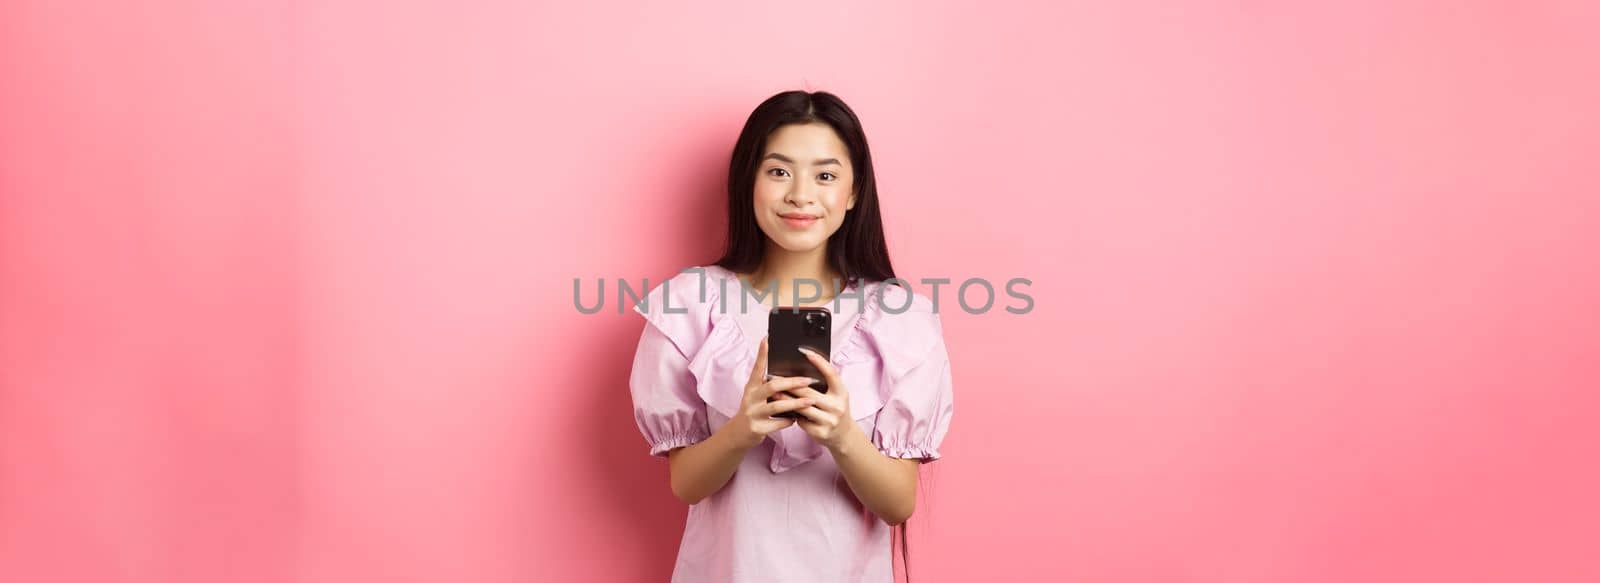 Online shopping. Cute asian girl smiling, holding mobile phone with happy face, standing in dress on pink background.